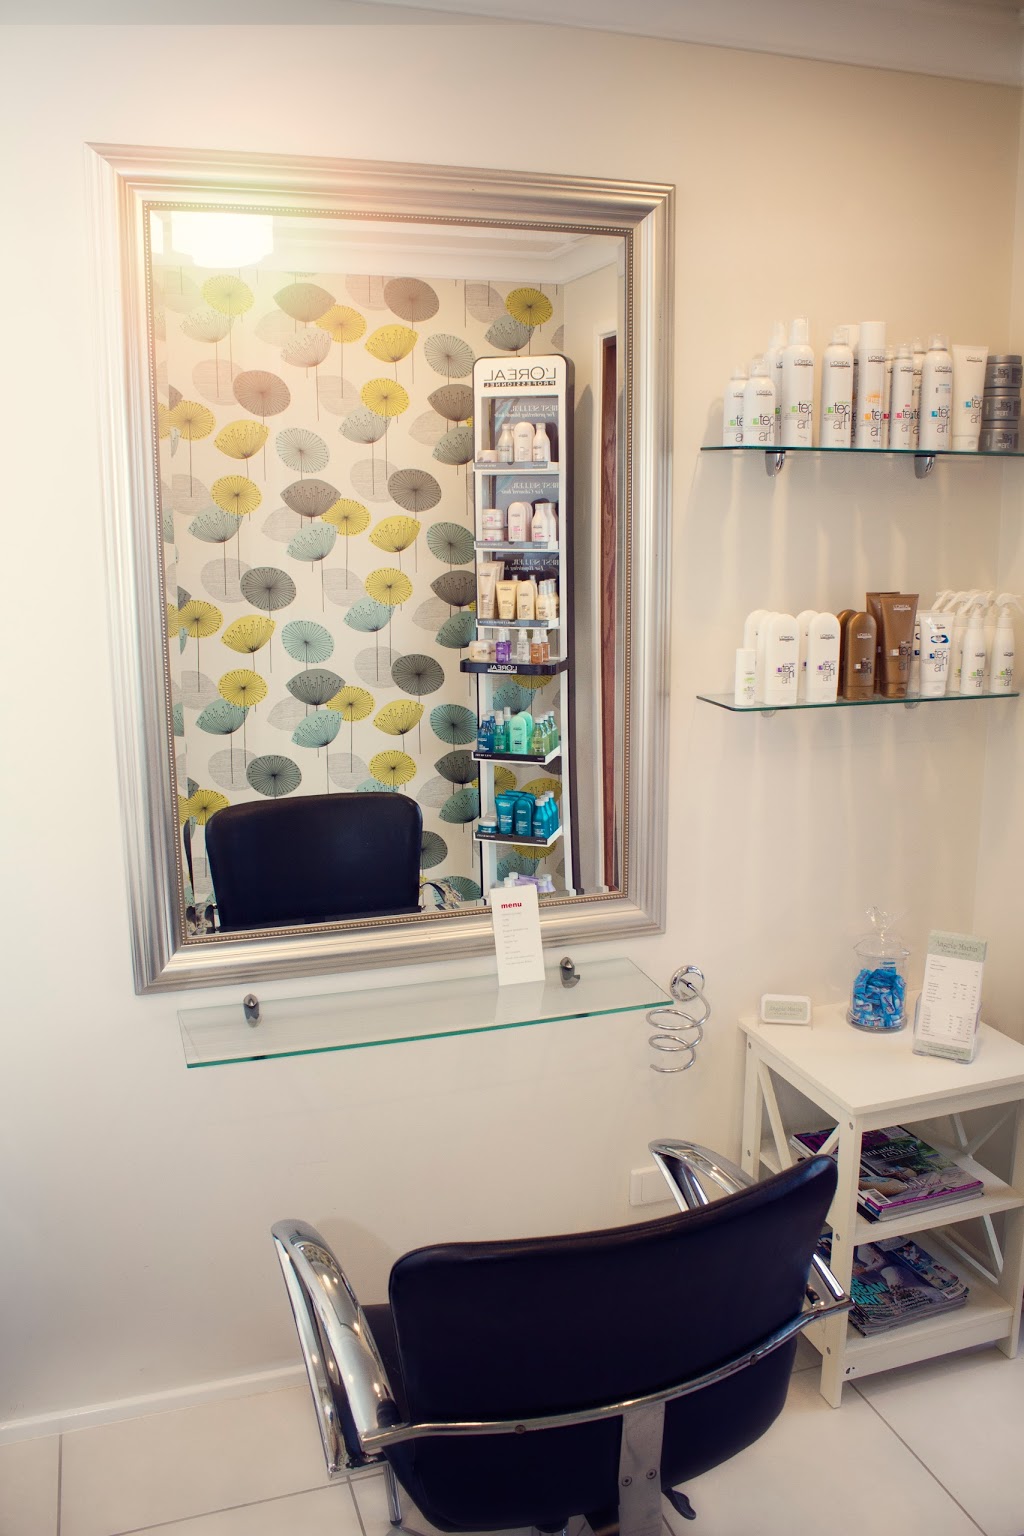 Angela Martin Hairdressing | Turquoise Cres, Griffin QLD 4503, Australia | Phone: 0466 458 554